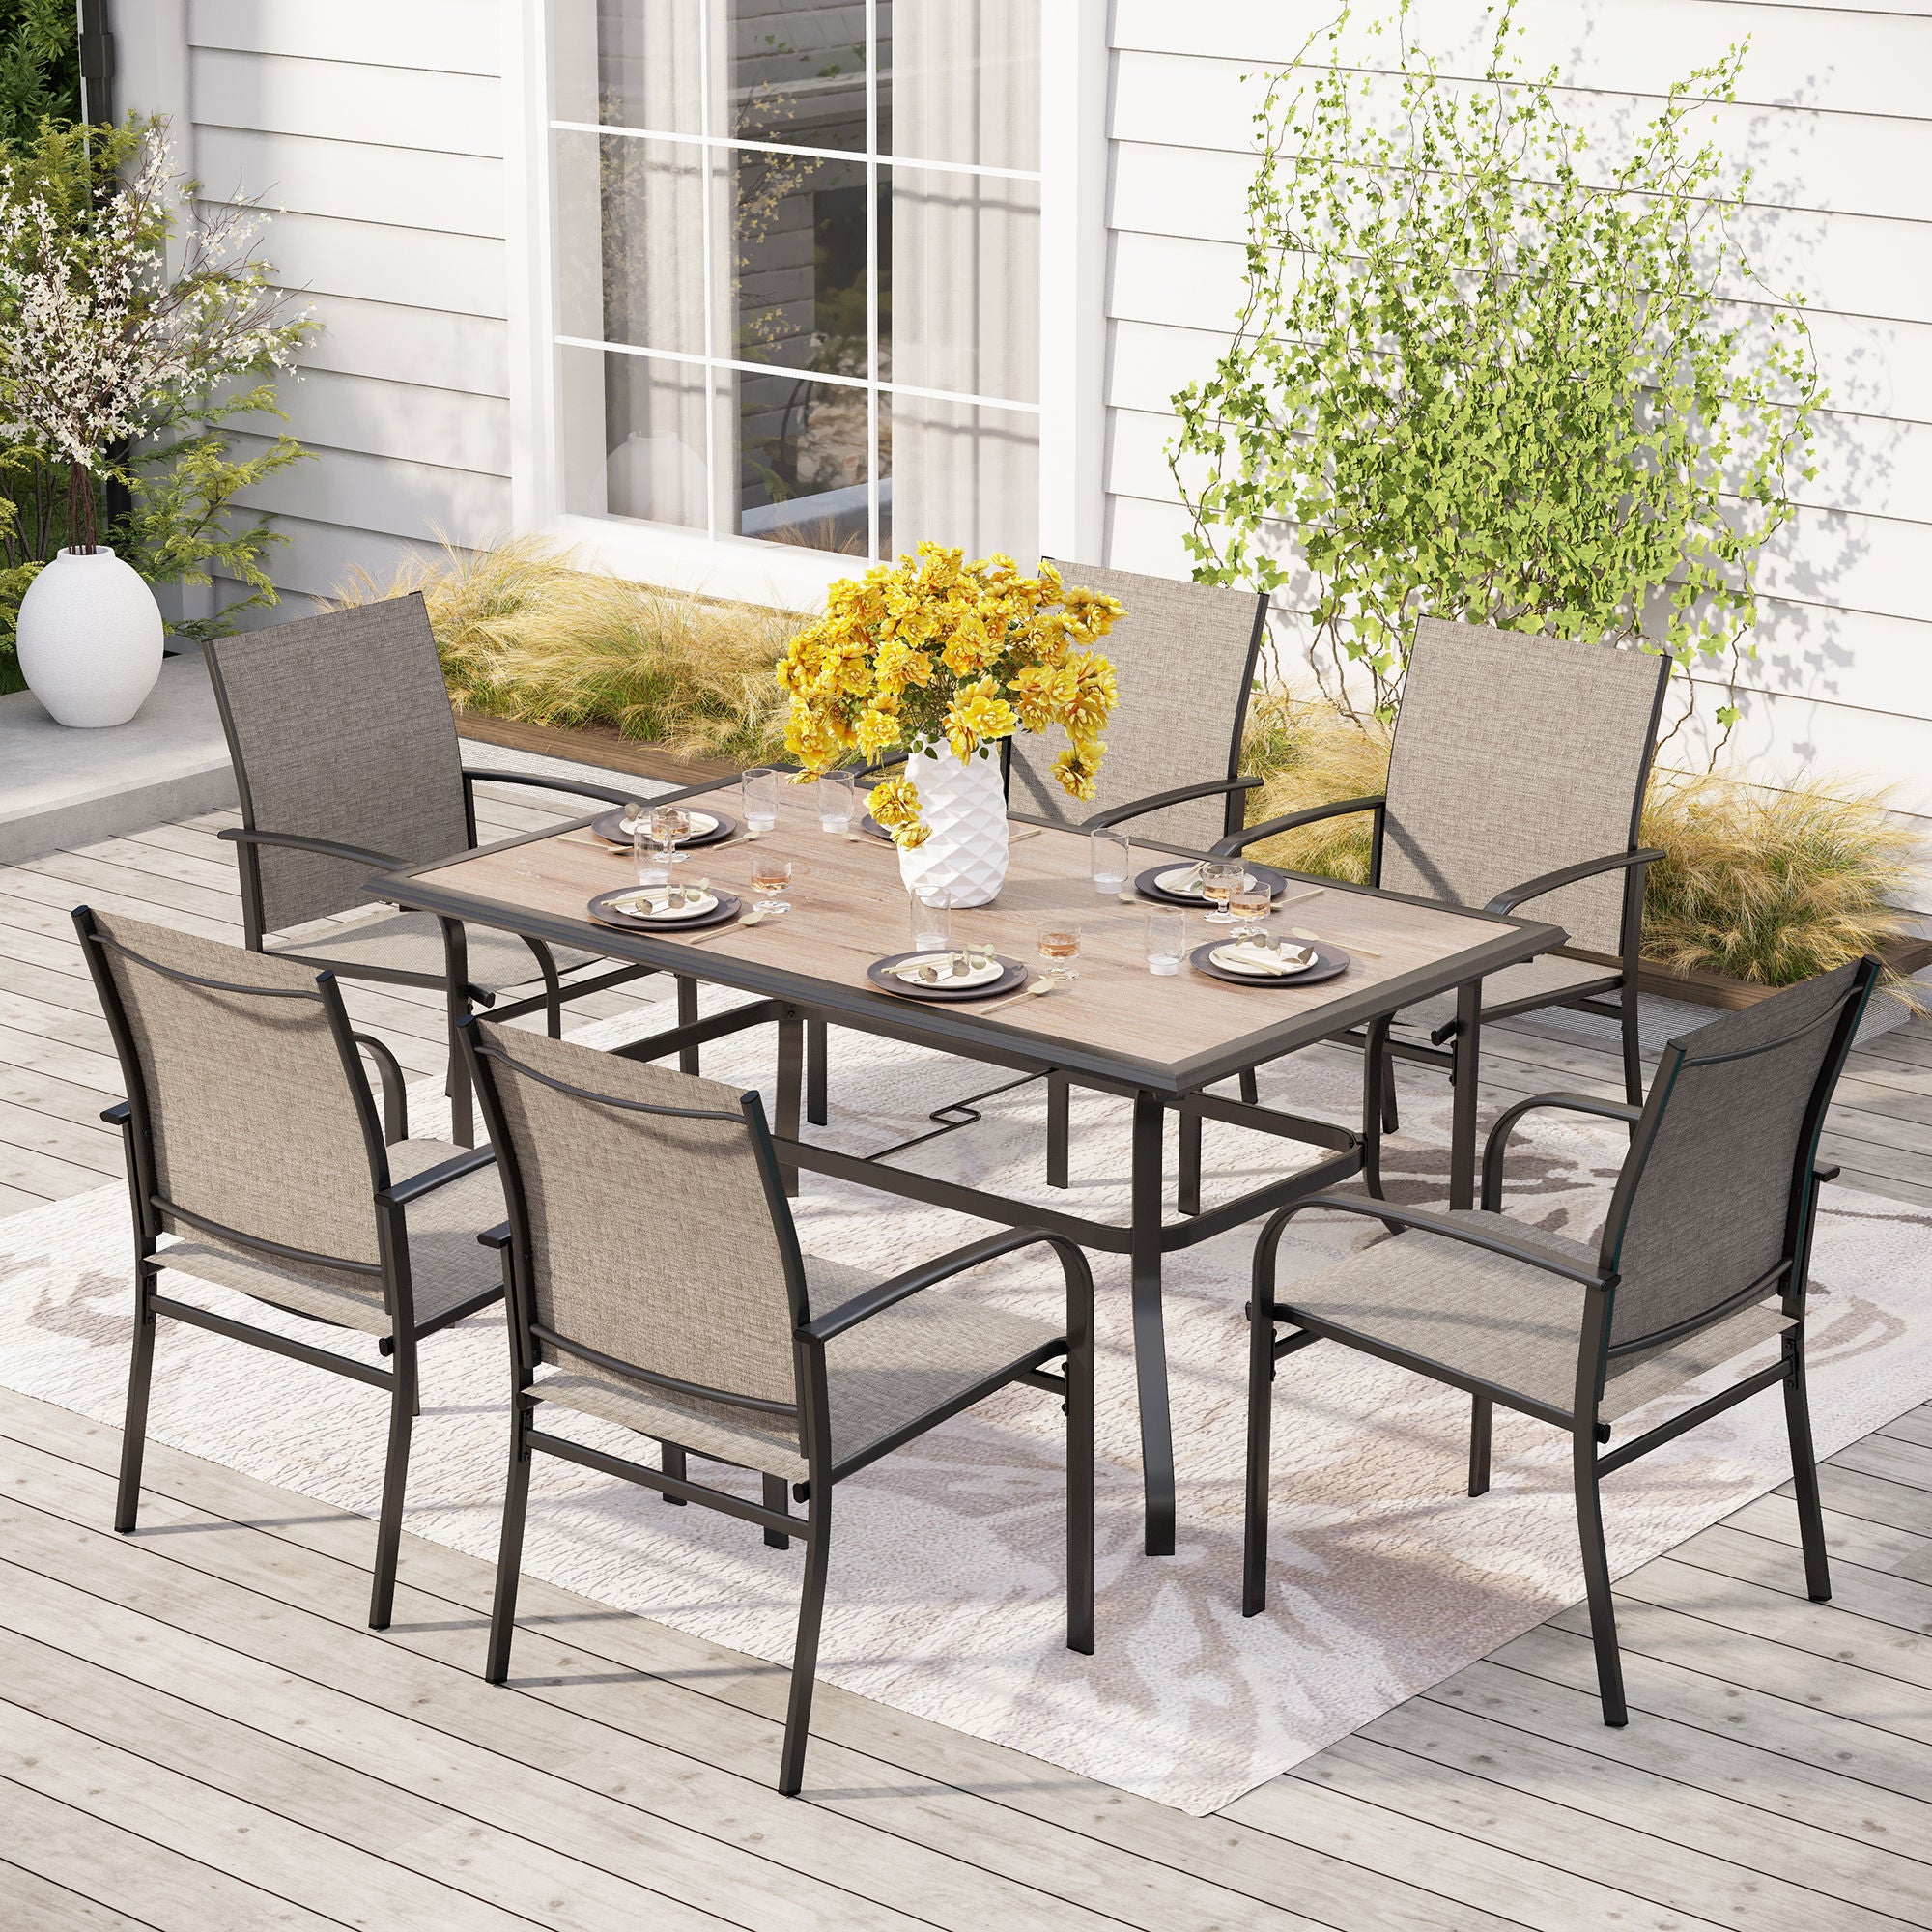 Sophia & William 7-Piece Patio Dining Sets Wood-look Table & Light Textilene Fixed Chairs